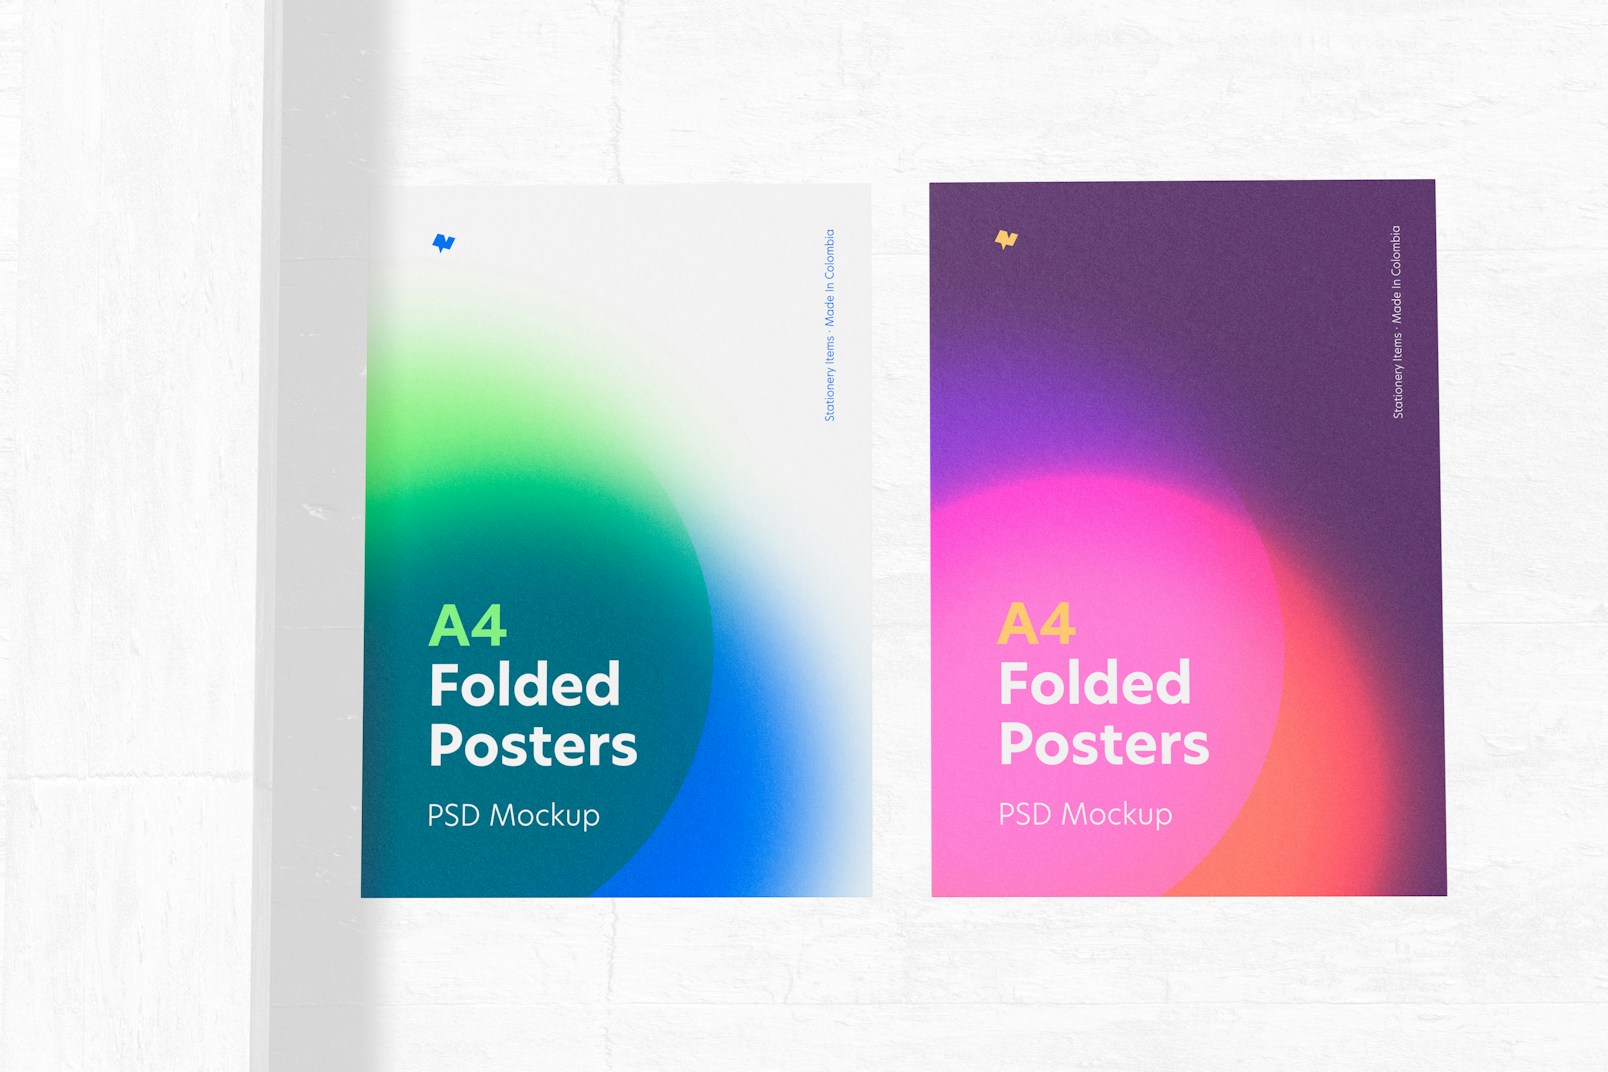 A4 Folded Posters on Wall Mockup